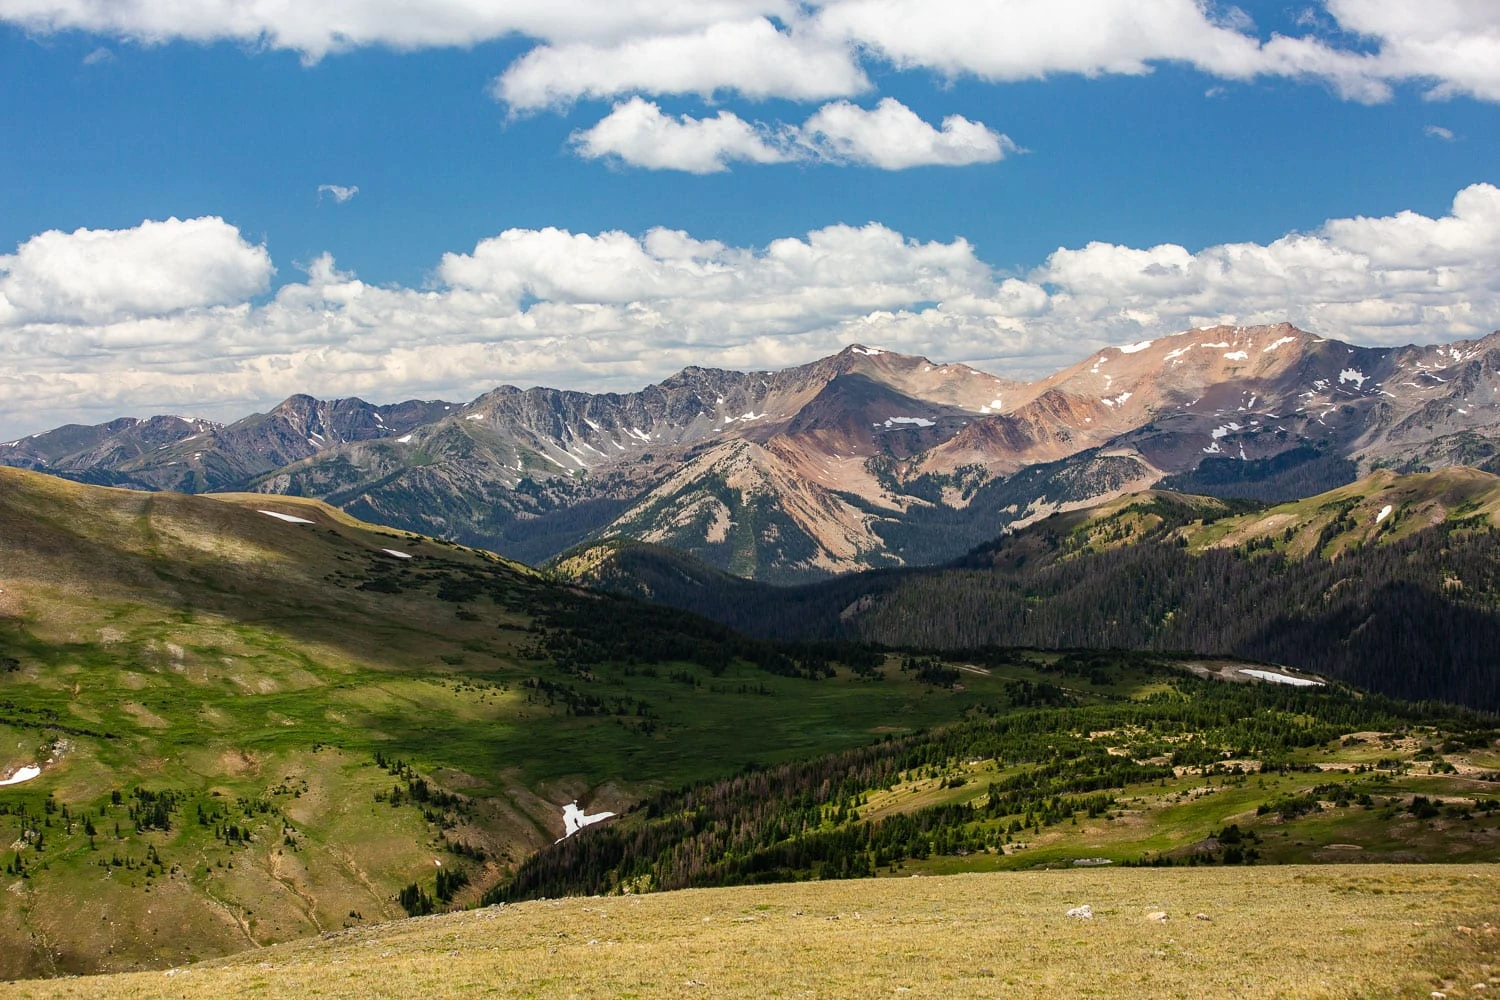 A view of the mountain peaks from Rocky Mountain National Park's trail ridge road.